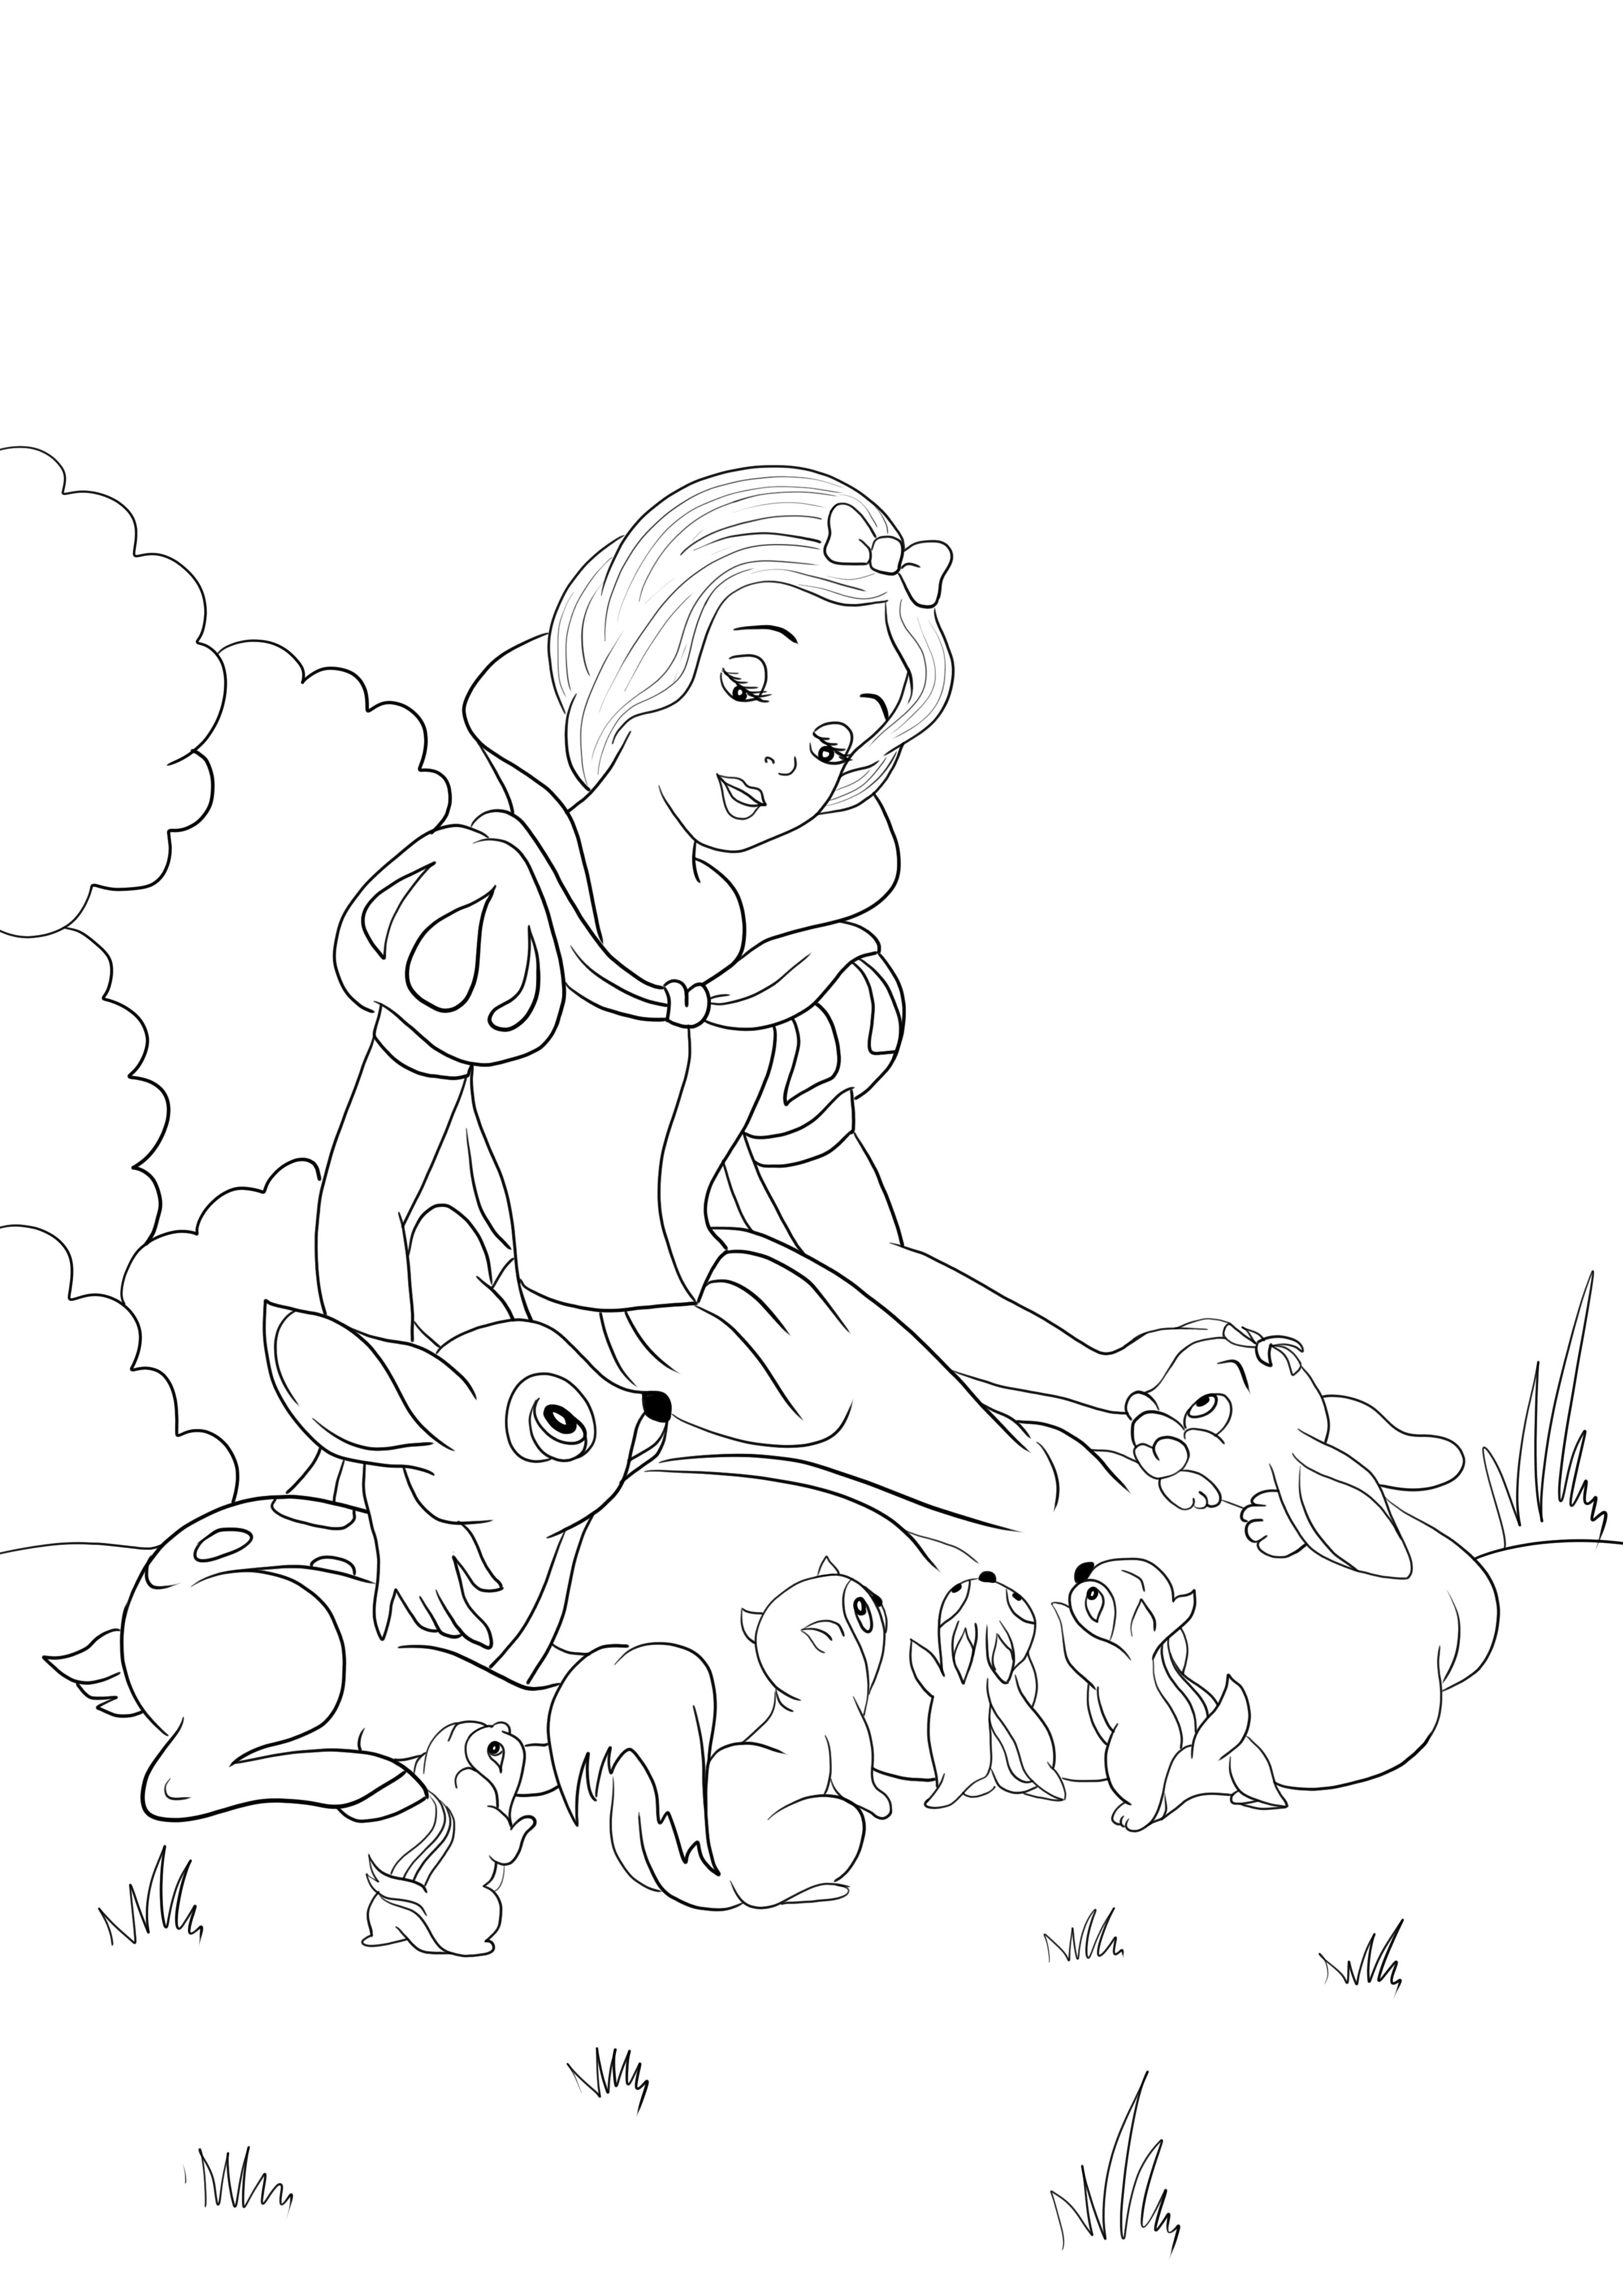 Snow White plays with the forest animals to print for free or save